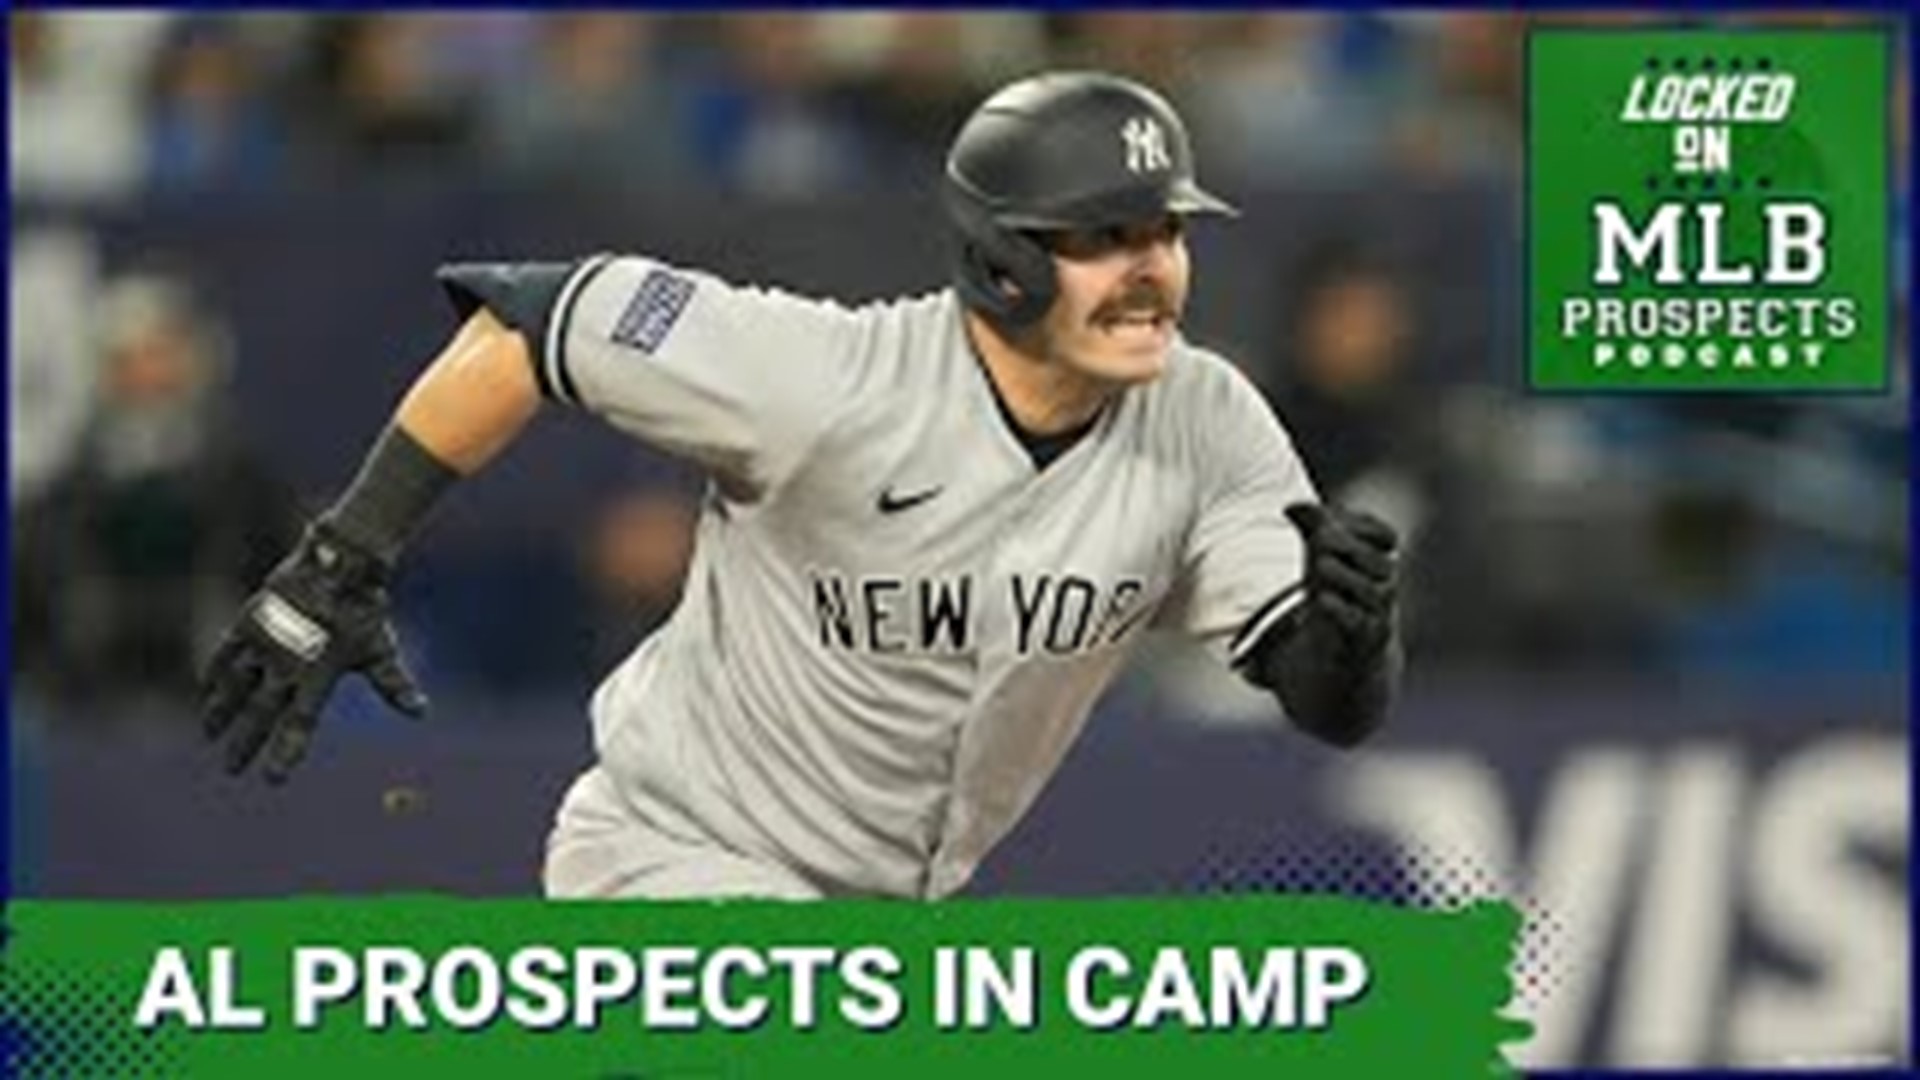 Host Lindsay Crosby looks at the prospects in camp in the American League, mostly focusing on the non-roster invitees, considering their chances of making the roster